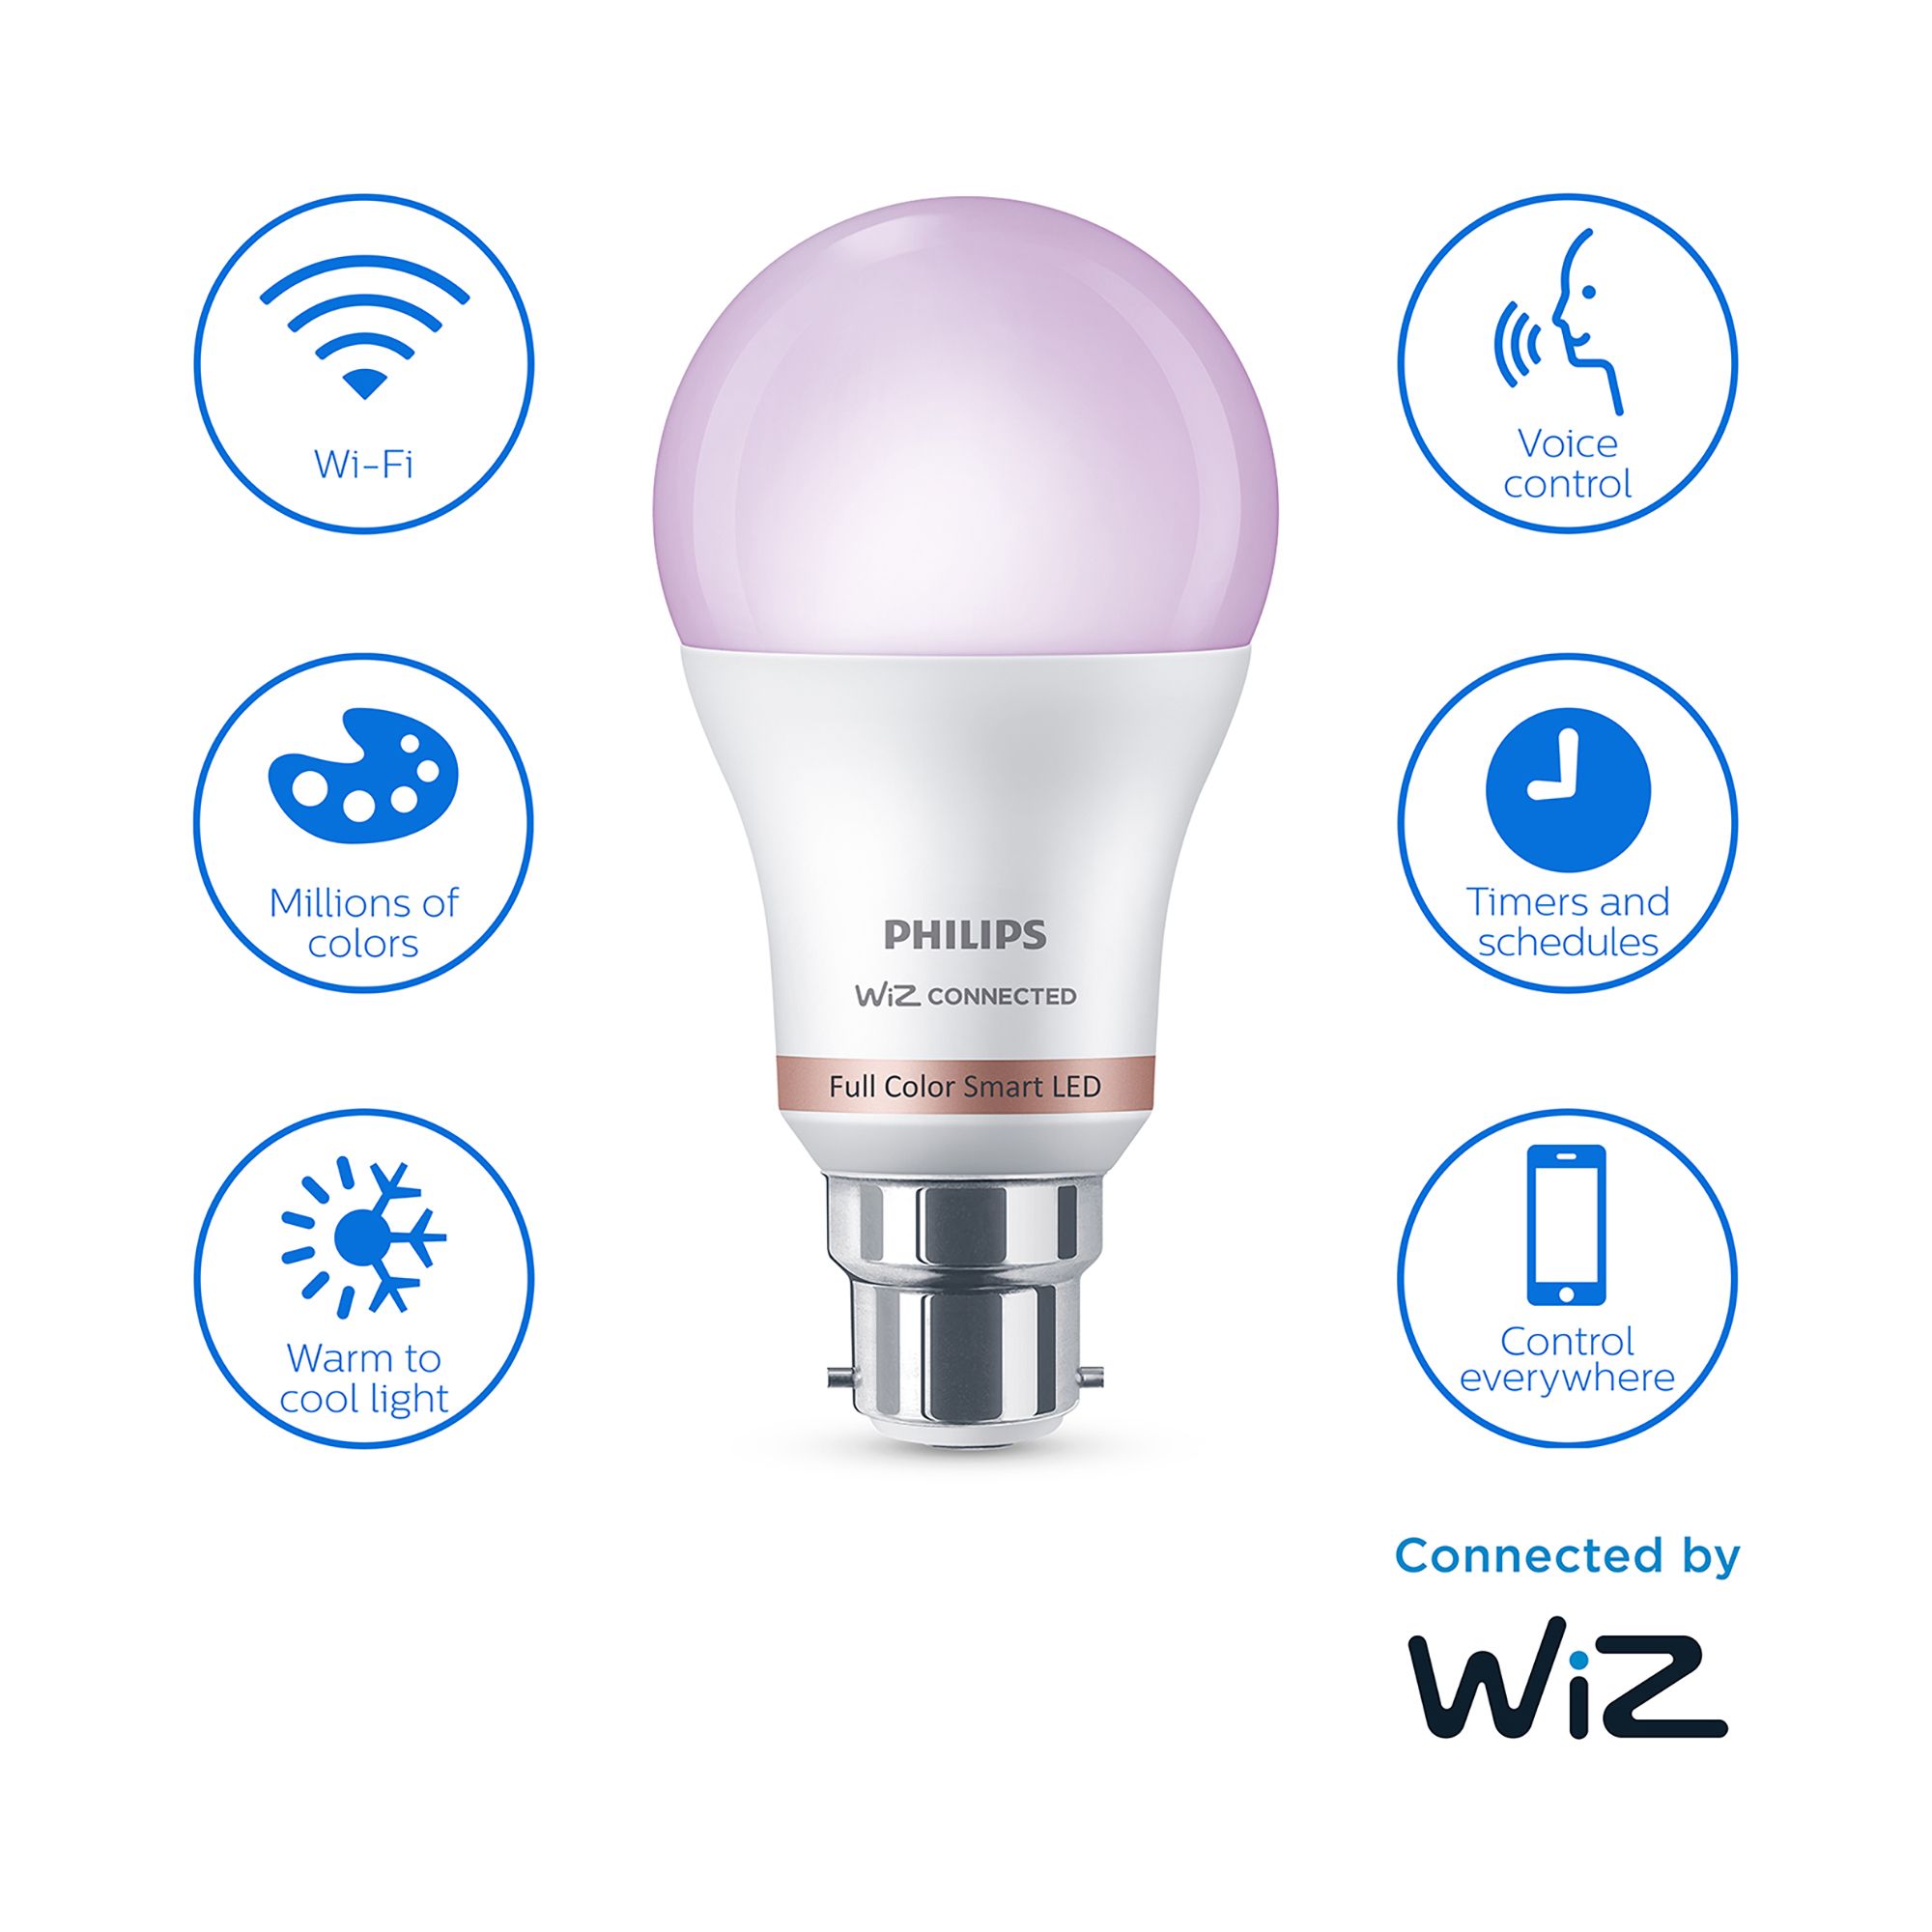 Philips B22 LED RGB & tunable white A60 Dimmable Smart bulb